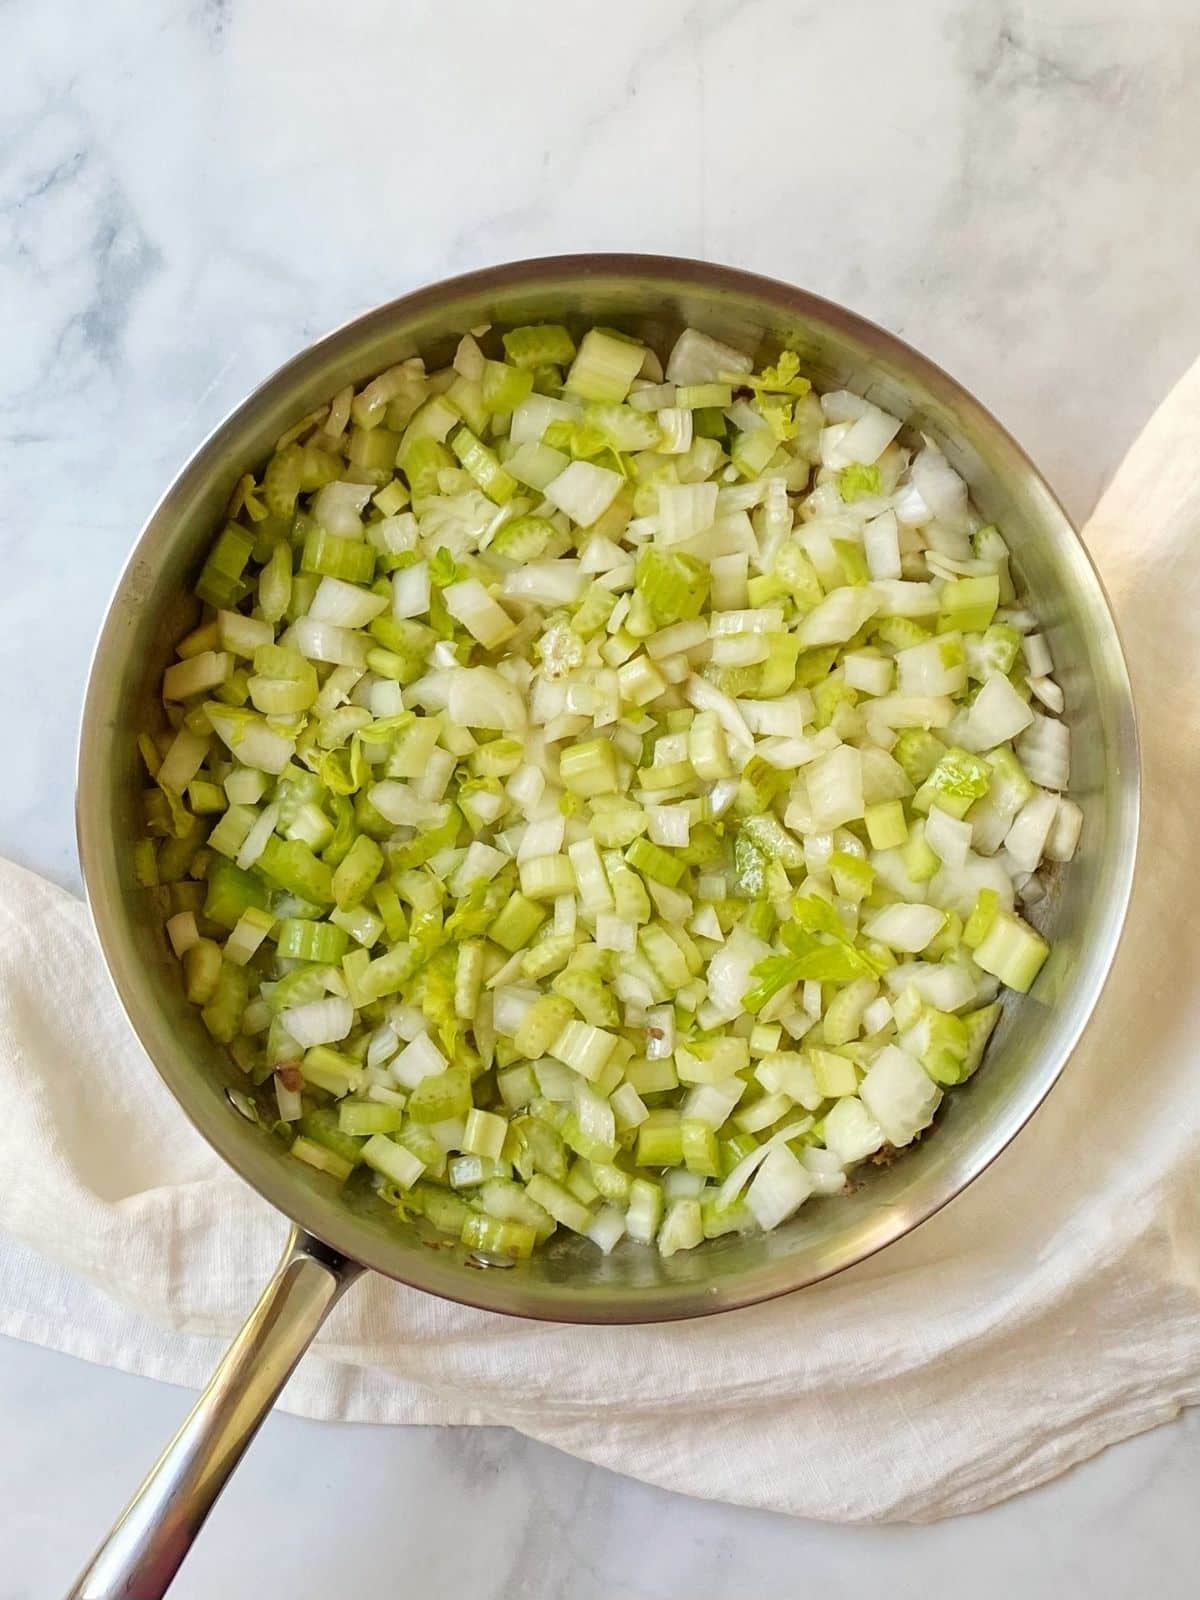 cooking onions and celery for dressing